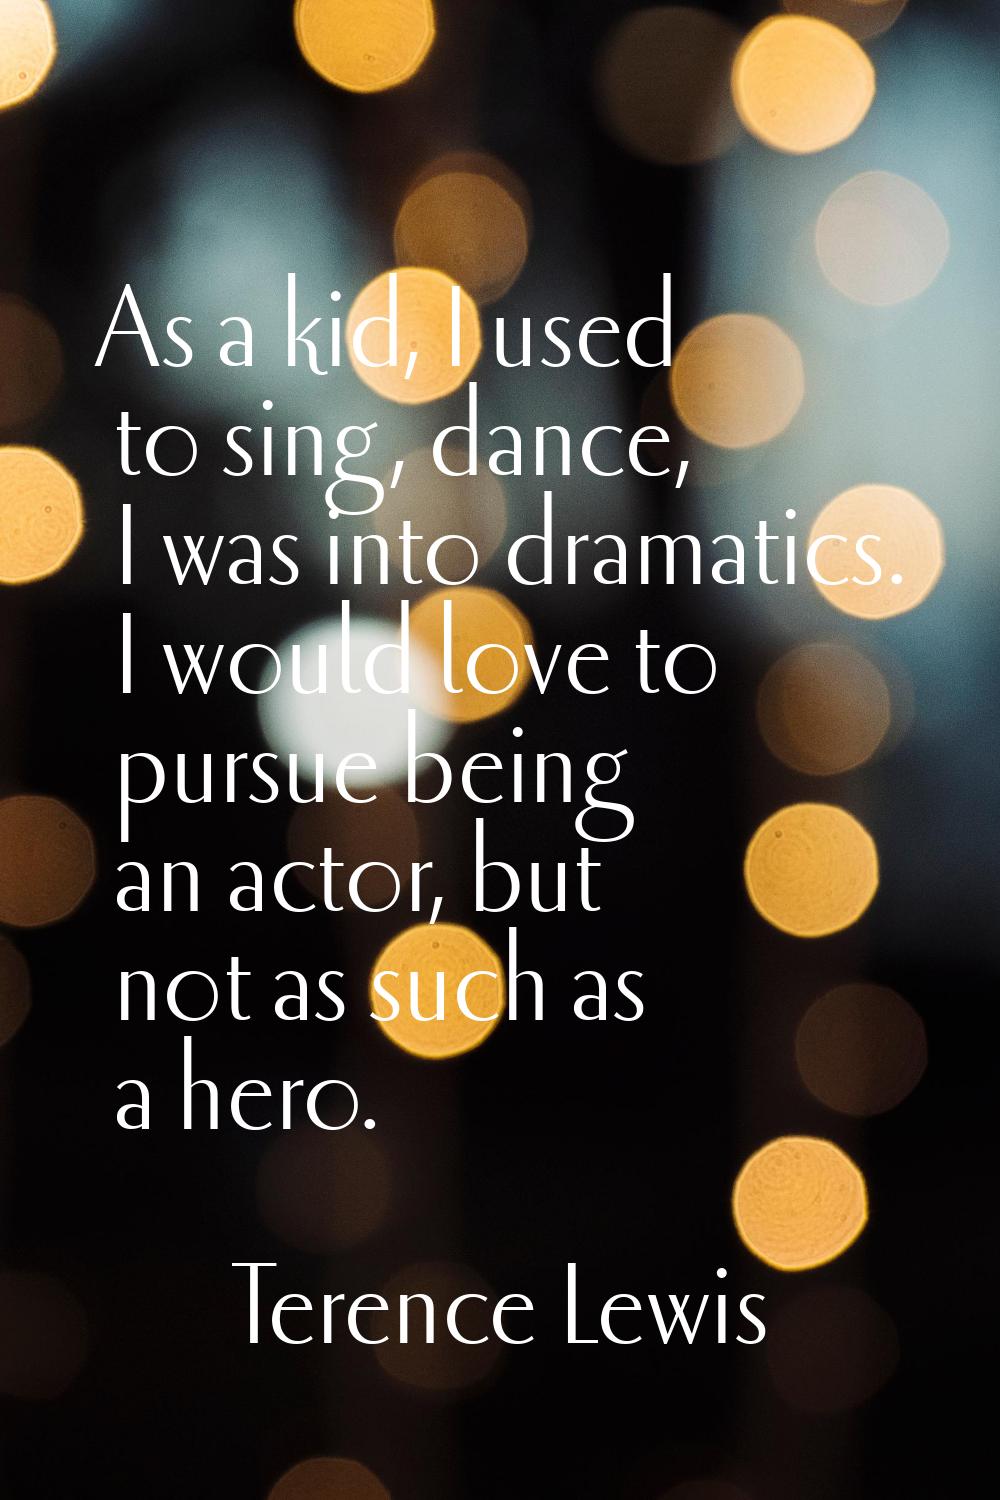 As a kid, I used to sing, dance, I was into dramatics. I would love to pursue being an actor, but n